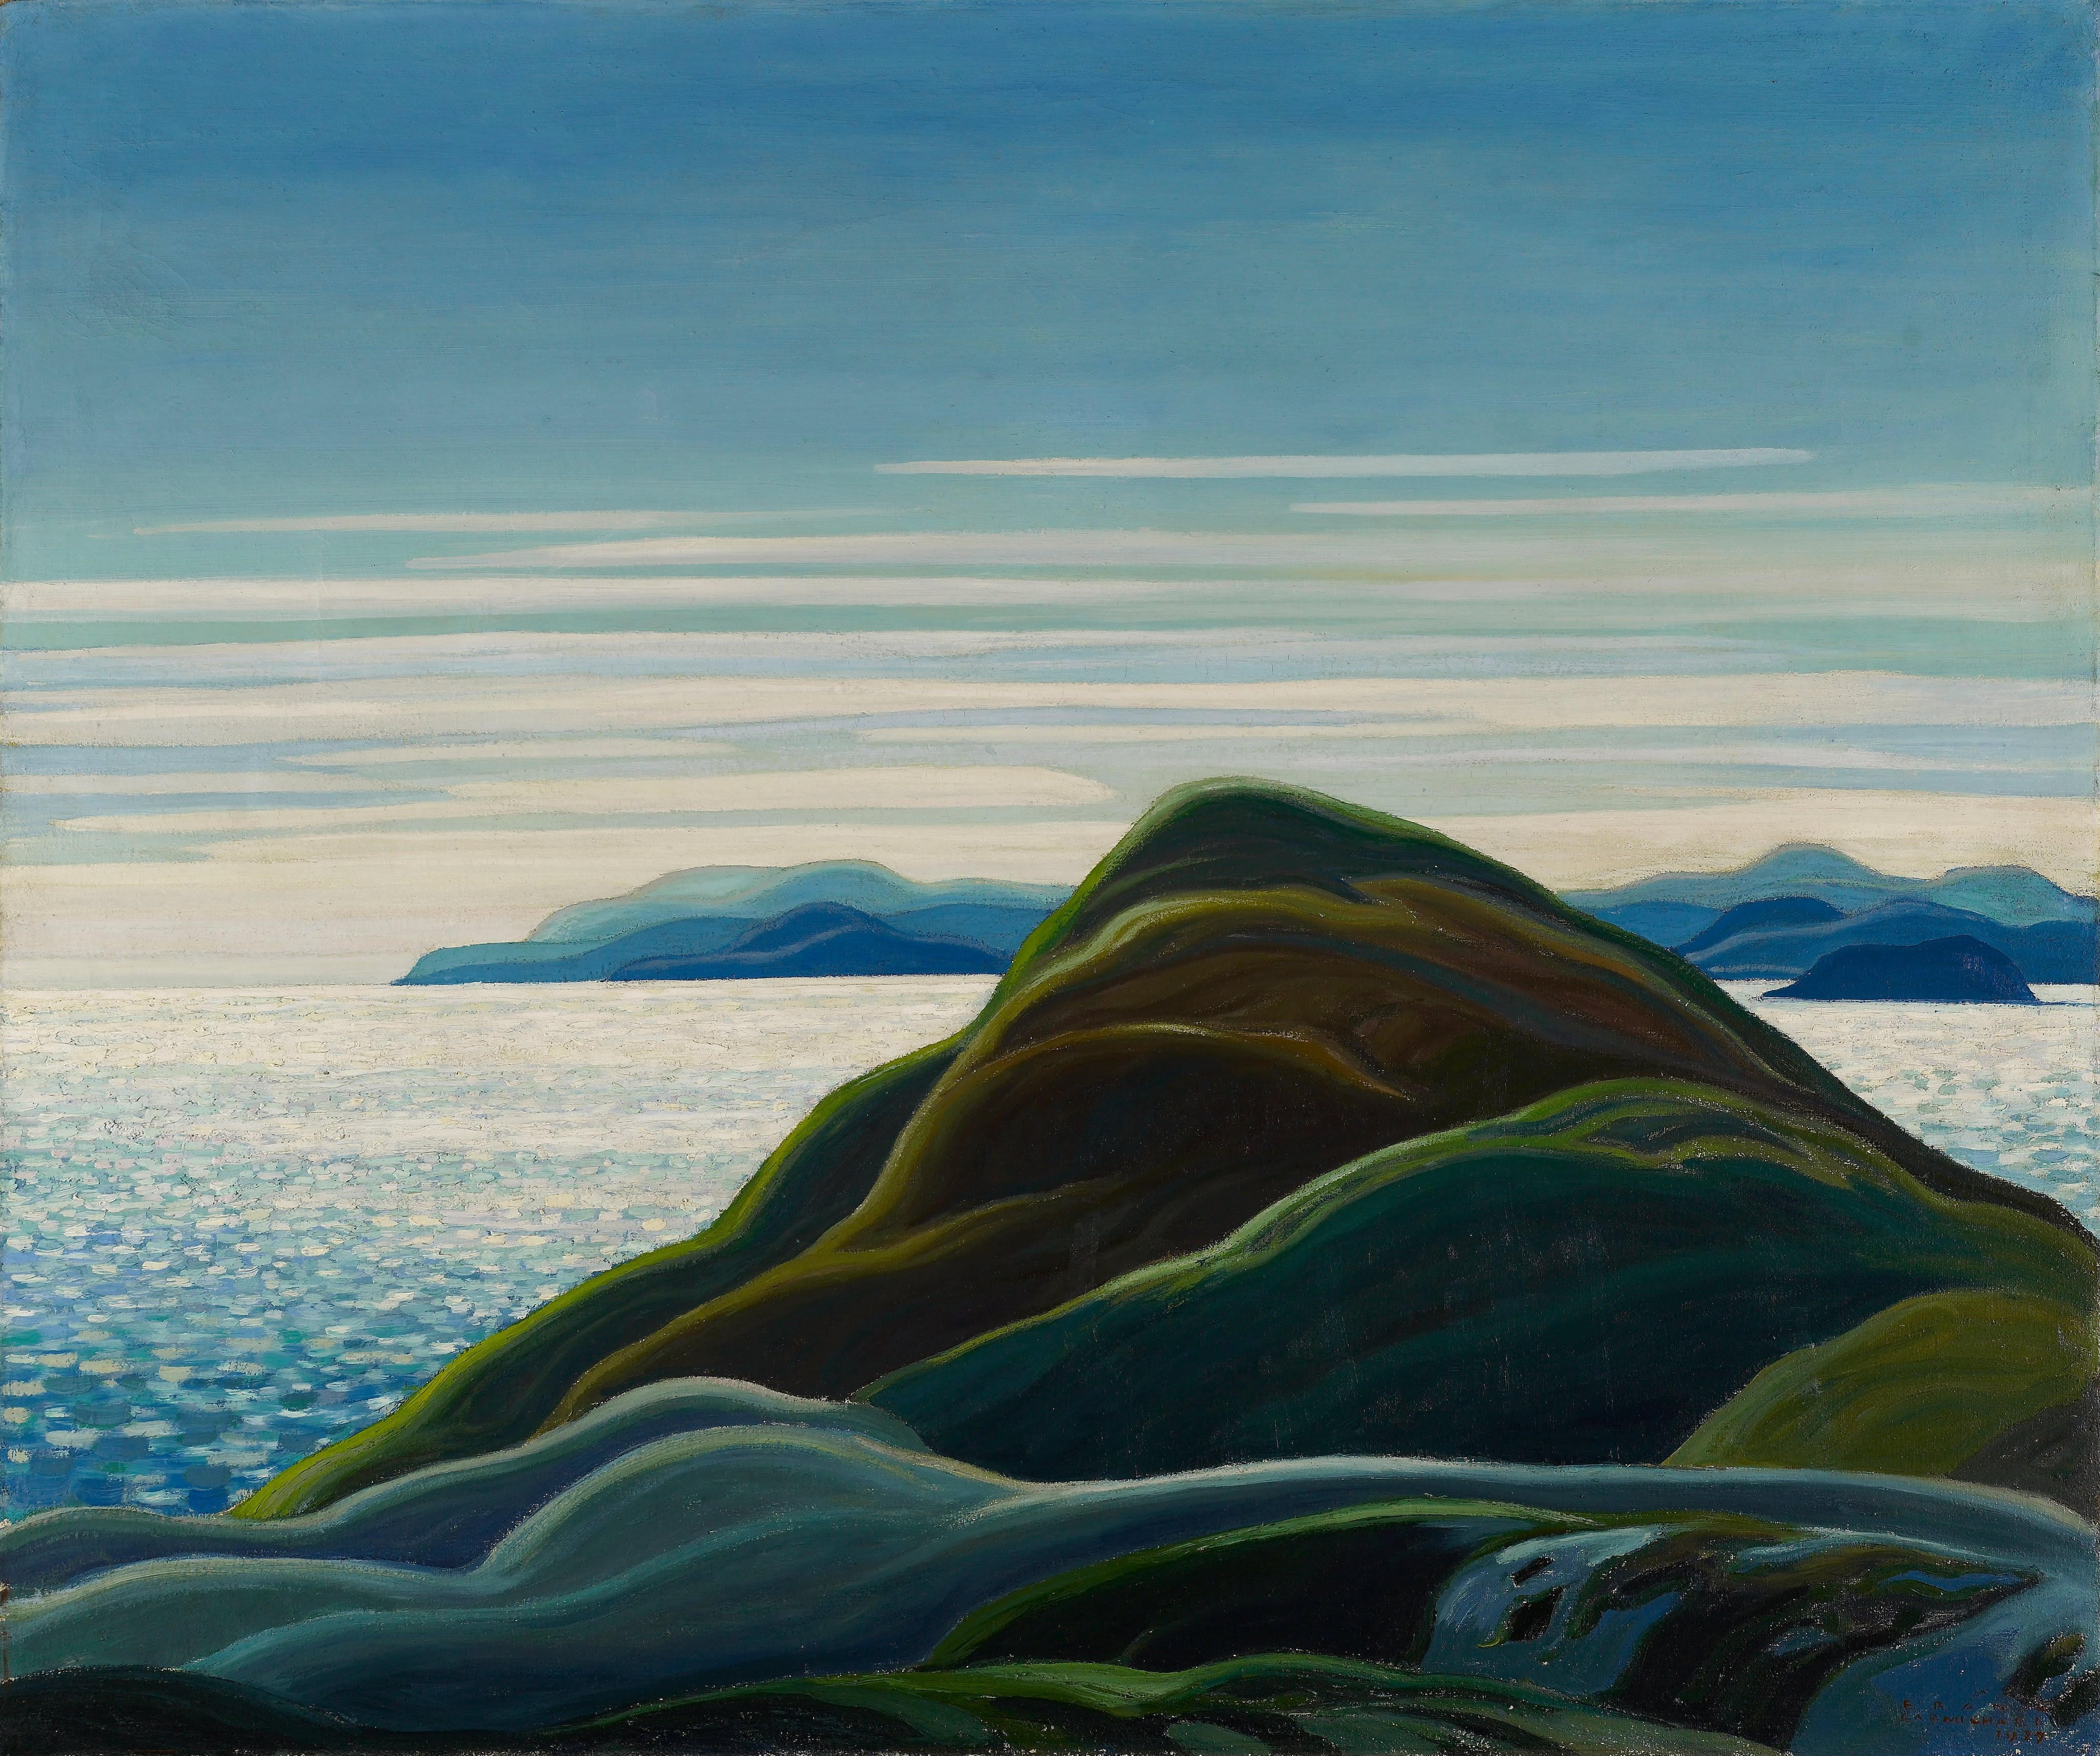 North Shore, Lake Superior by Franklin Carmichael - 1927 - 122.5 x 102.8 cm Art Gallery of Ontario